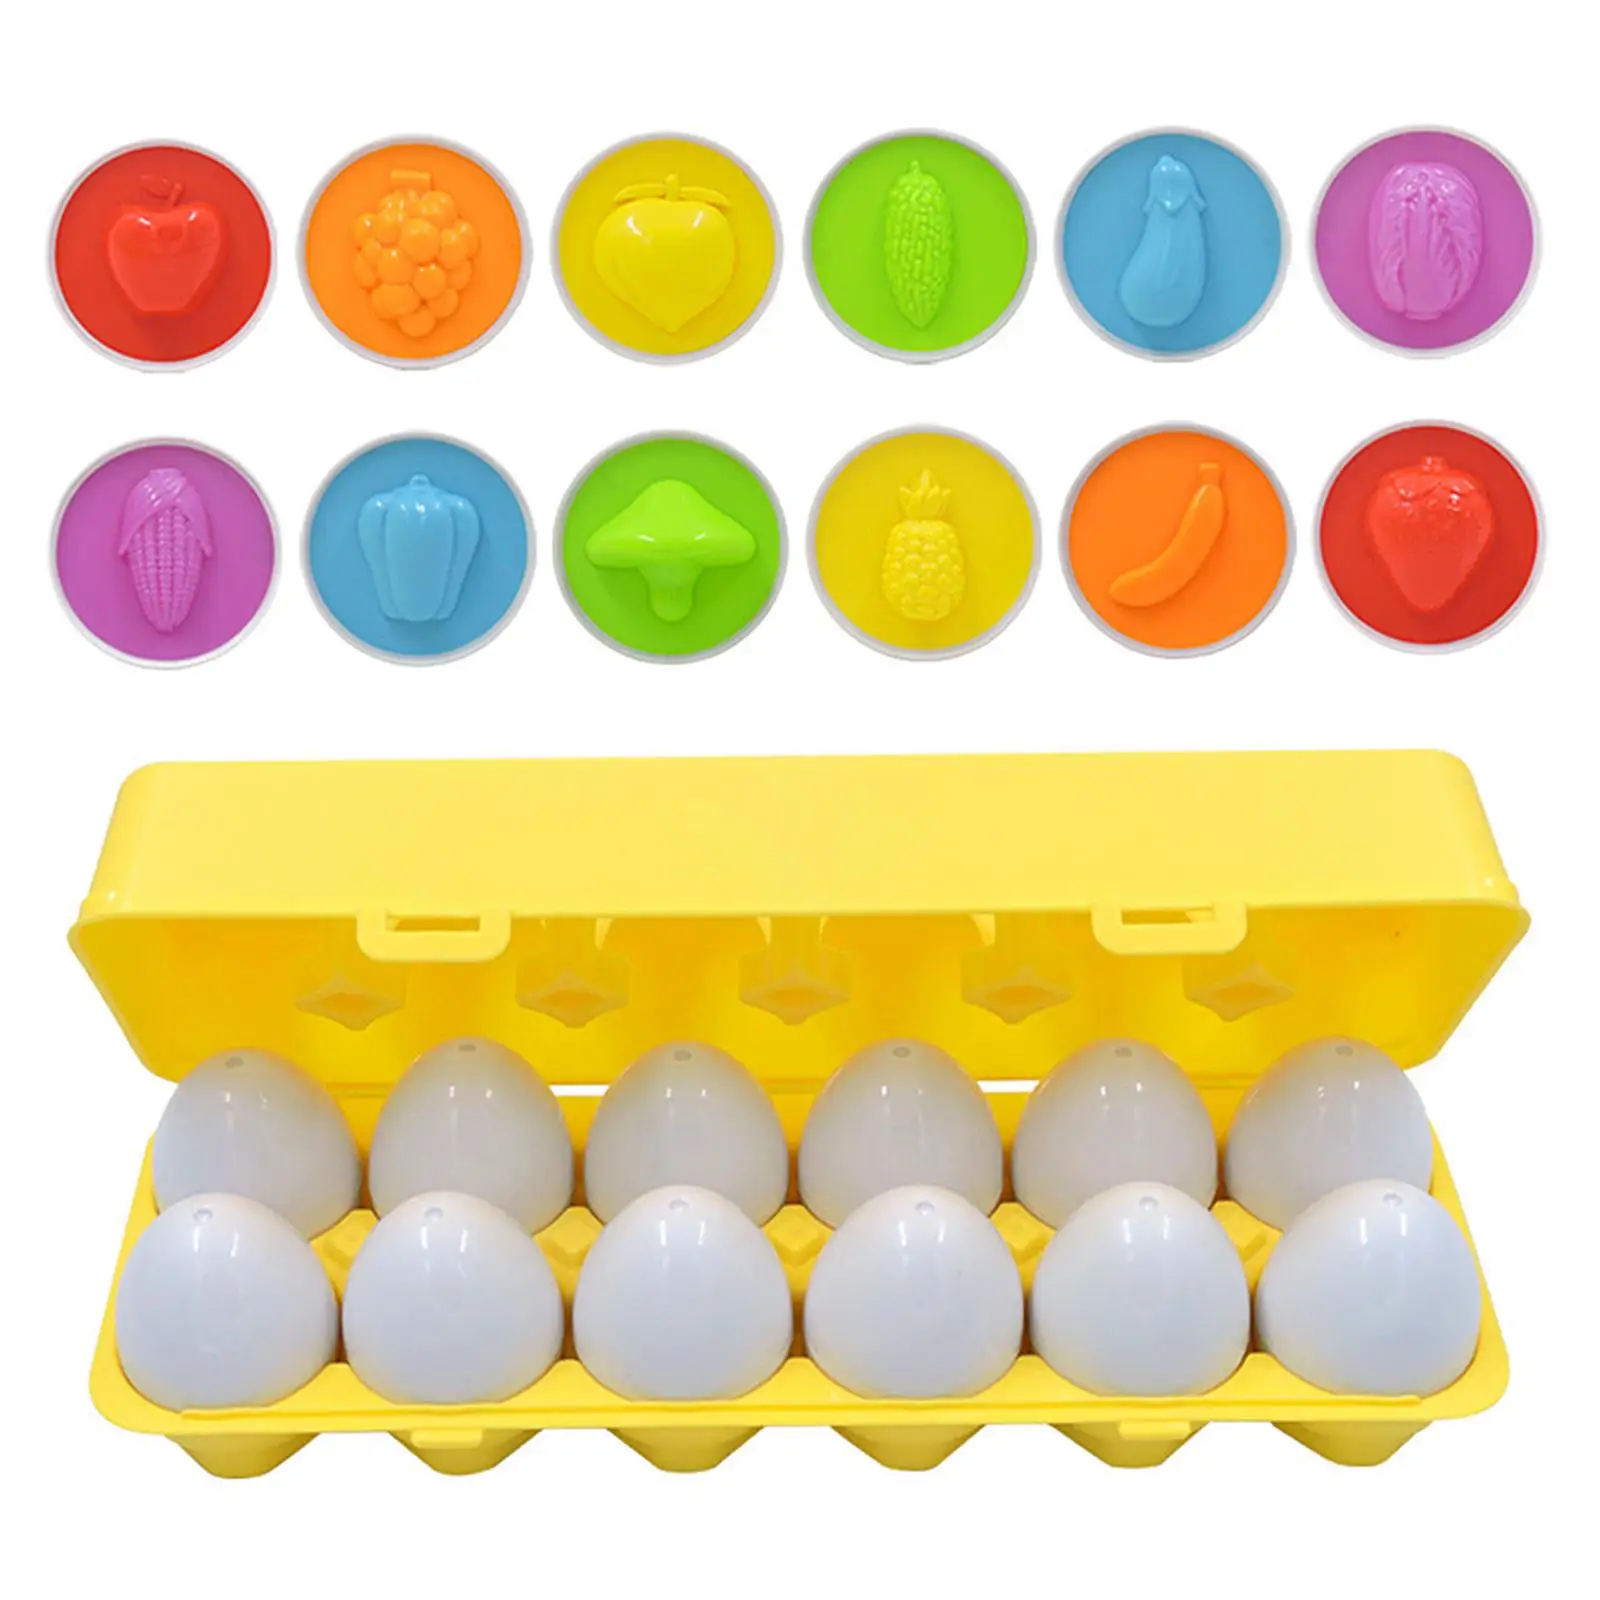 12x Matching Eggs Toy Color Recognizing Educational Shape Matching Learning Toy Puzzle Toys Fine Motor Skill Toy for Toddler